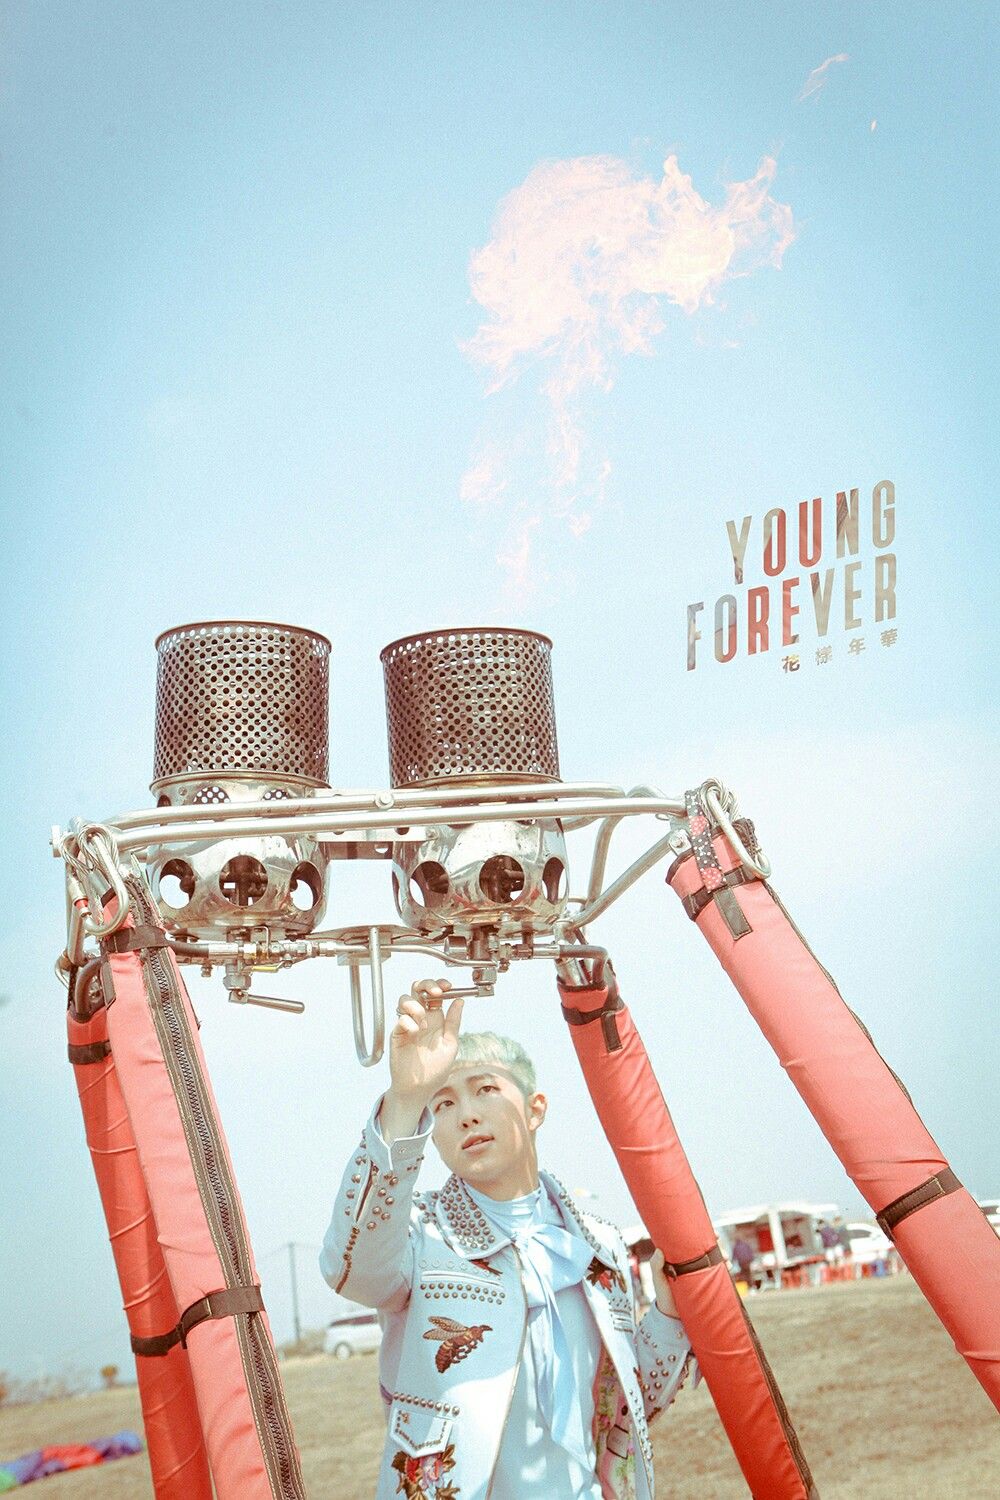 Bts Young Forever Rm - 1000x1500 Wallpaper 